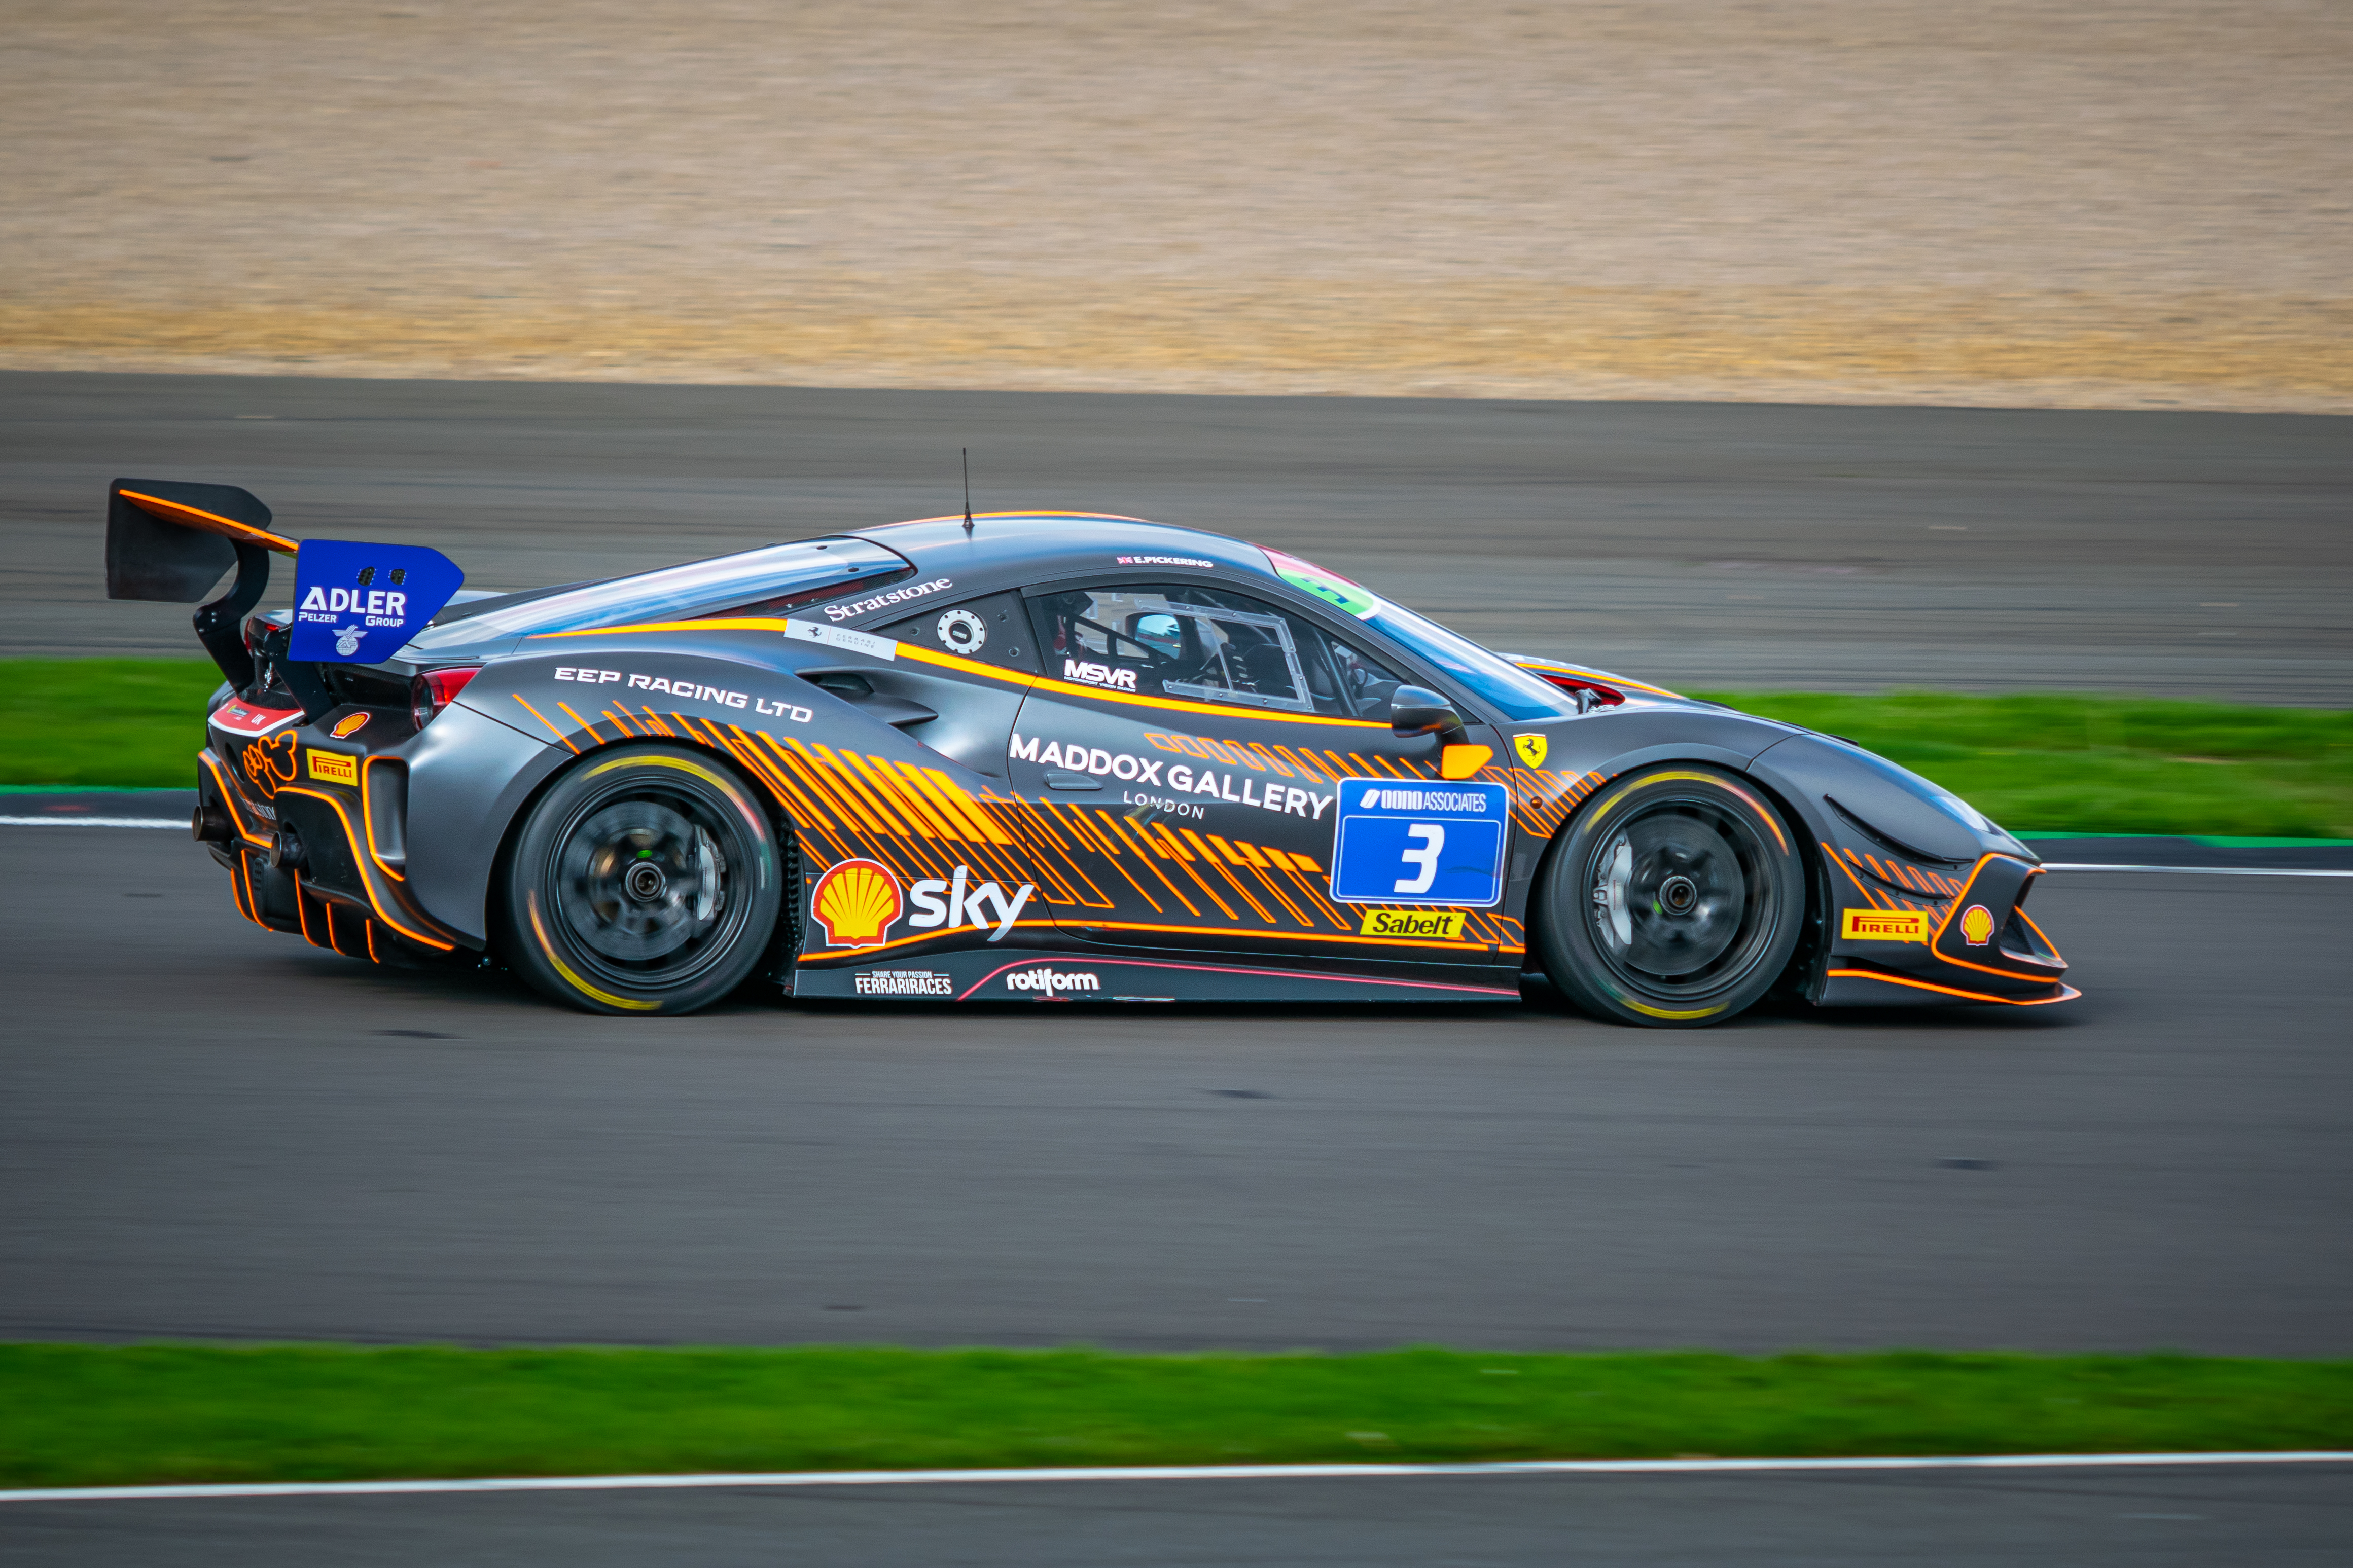 racing car from Ferrari challenge uk at Silverstone]